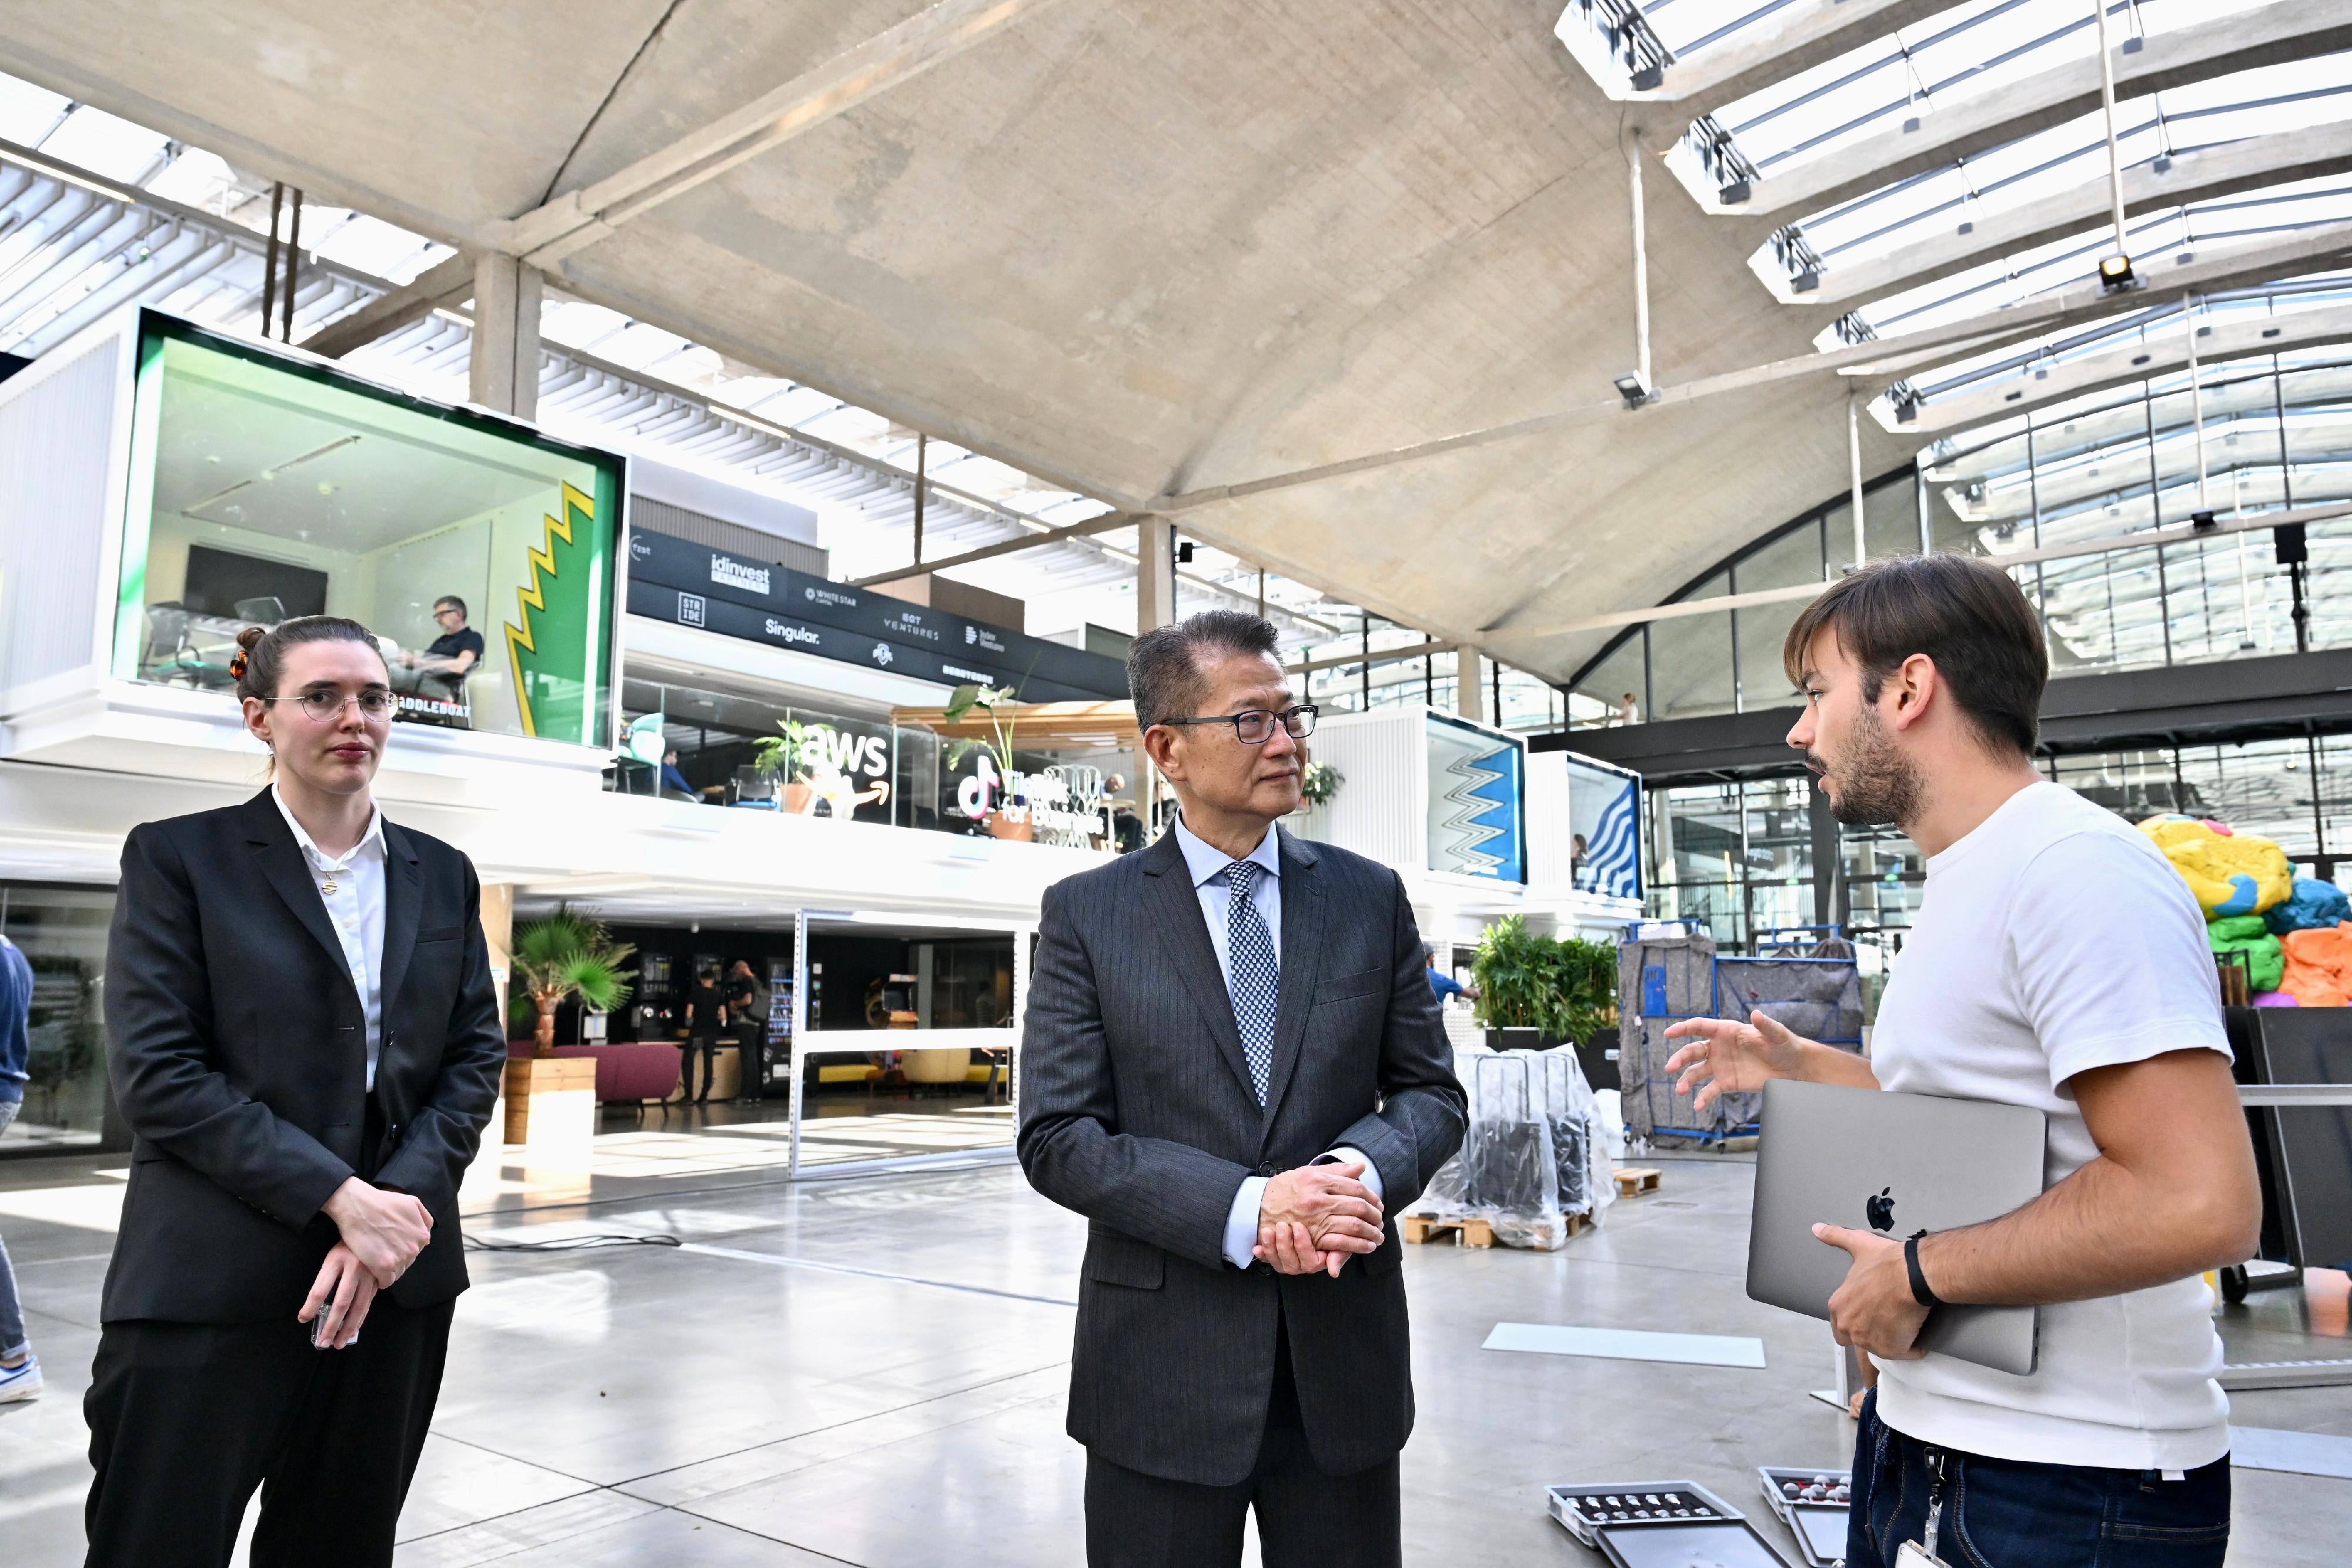 The Financial Secretary, Mr Paul Chan, visited Station F, a start-up campus in Paris yesterday (September 18, Paris time); and met with representatives of La French Tech, France's start-up scene, to understand the policies and work undertaken by the country in nurturing its start-up ecosystem. Photo shows Mr Chan (second right) being briefed by a representative of Station F on the operation of the campus.